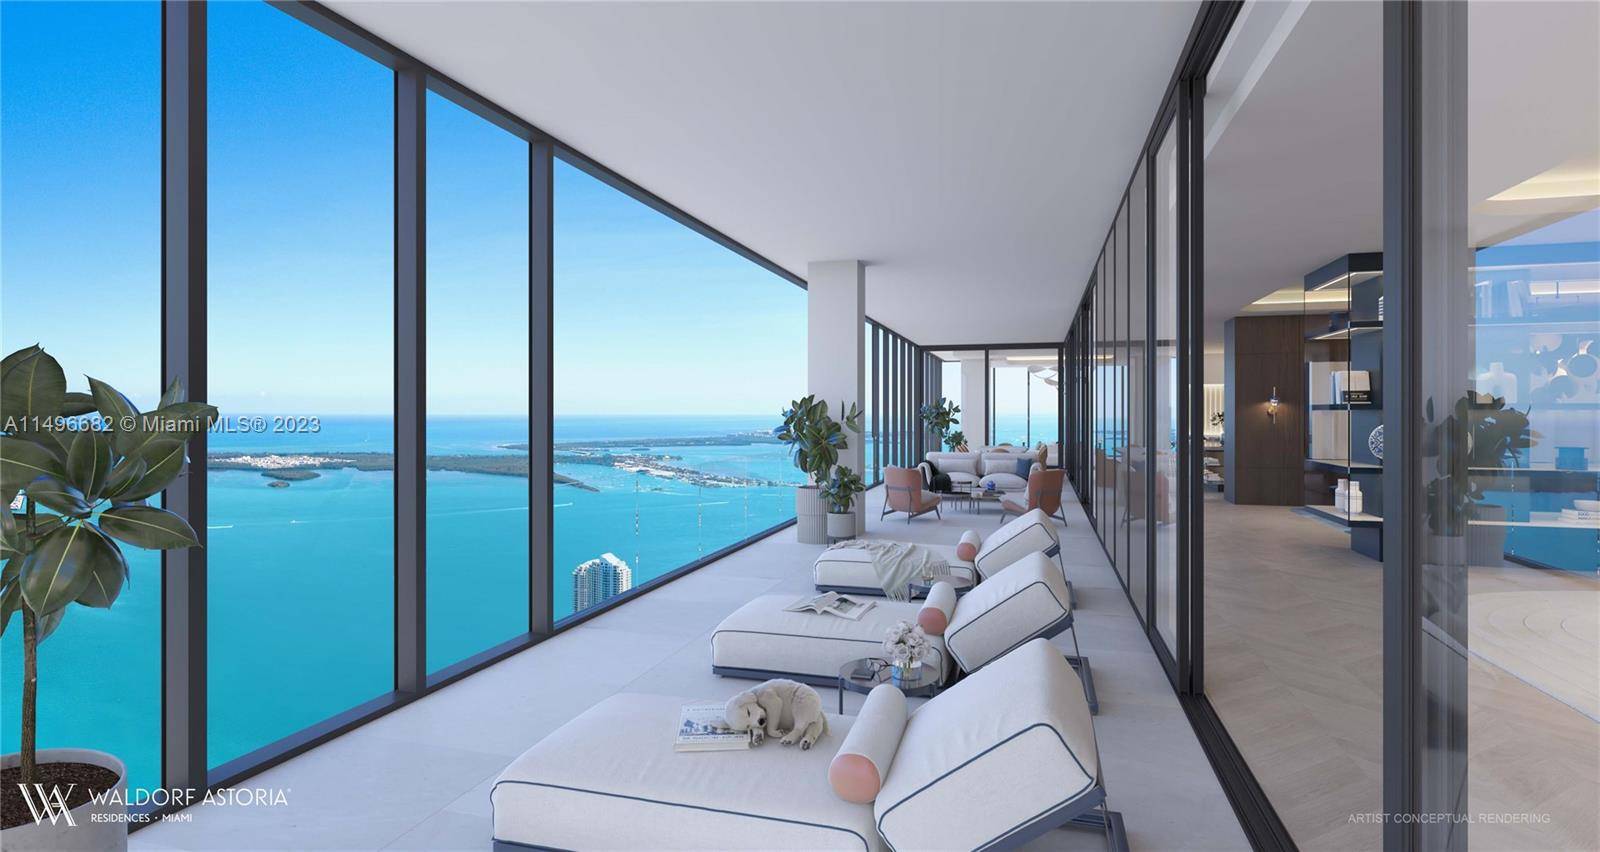 A Legacy Penthouse. Nestled atop Miami's most iconic tower sits the limited penthouse collection at Waldorf Astoria.